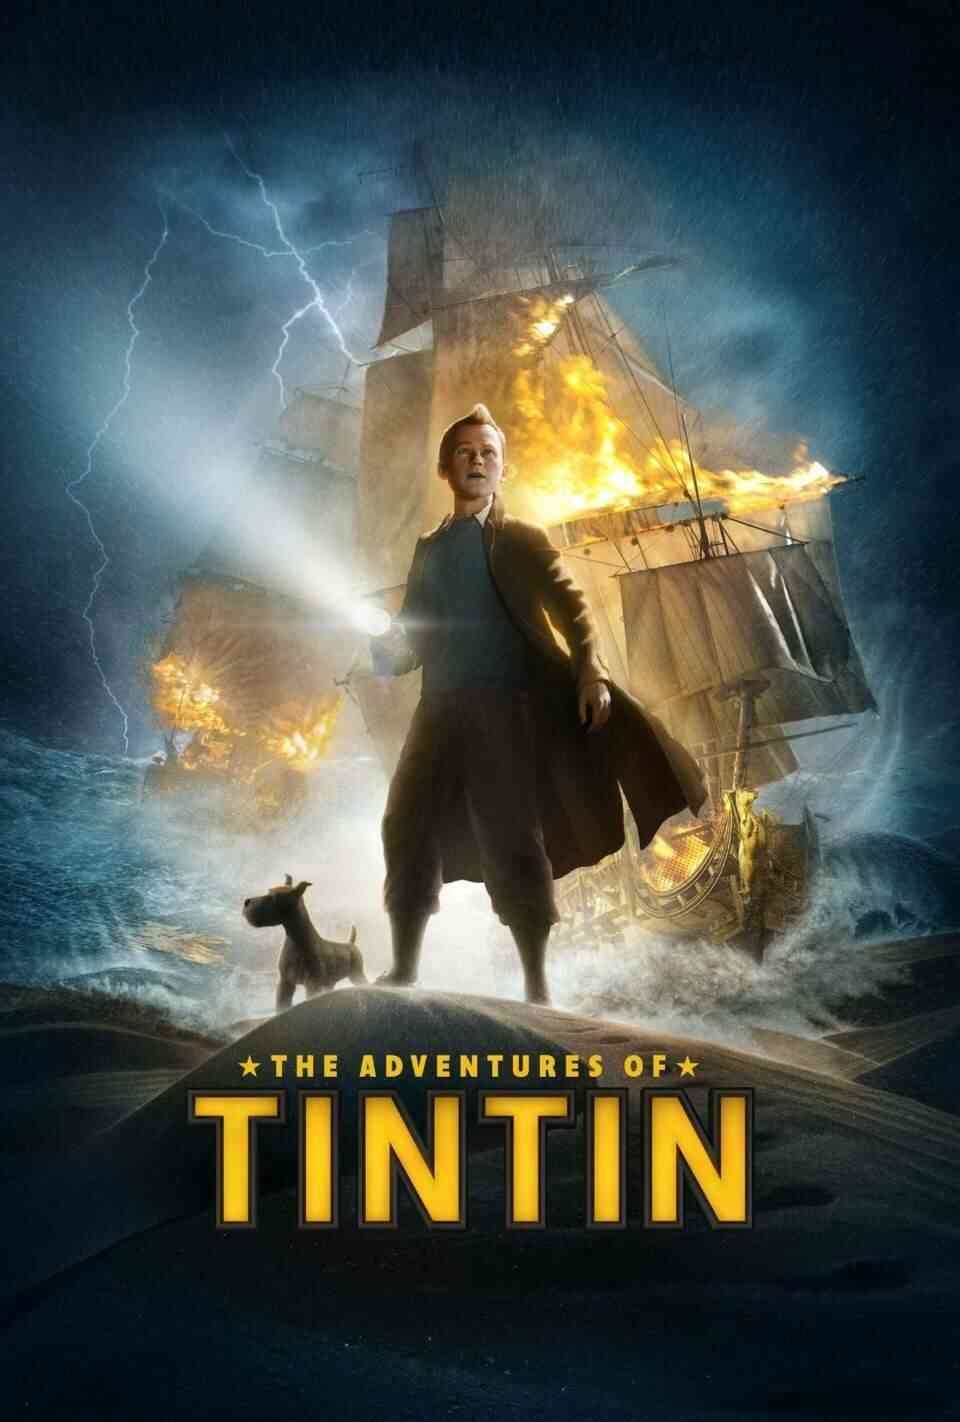 Read The Adventures of TinTin screenplay (poster)